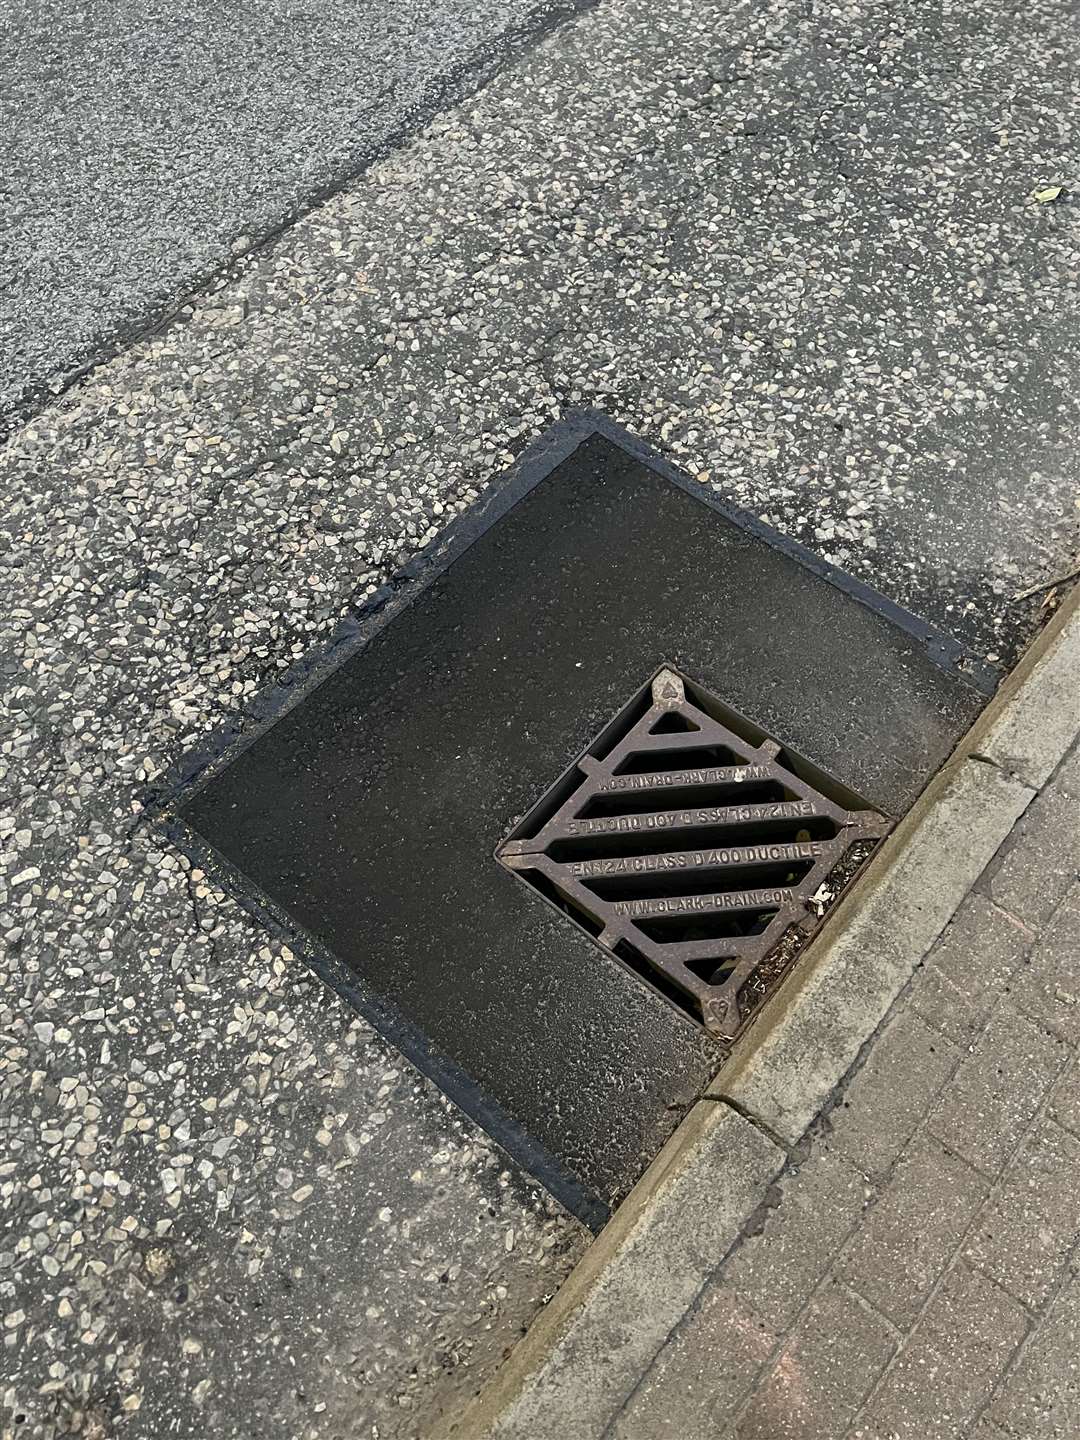 The repaired drain.